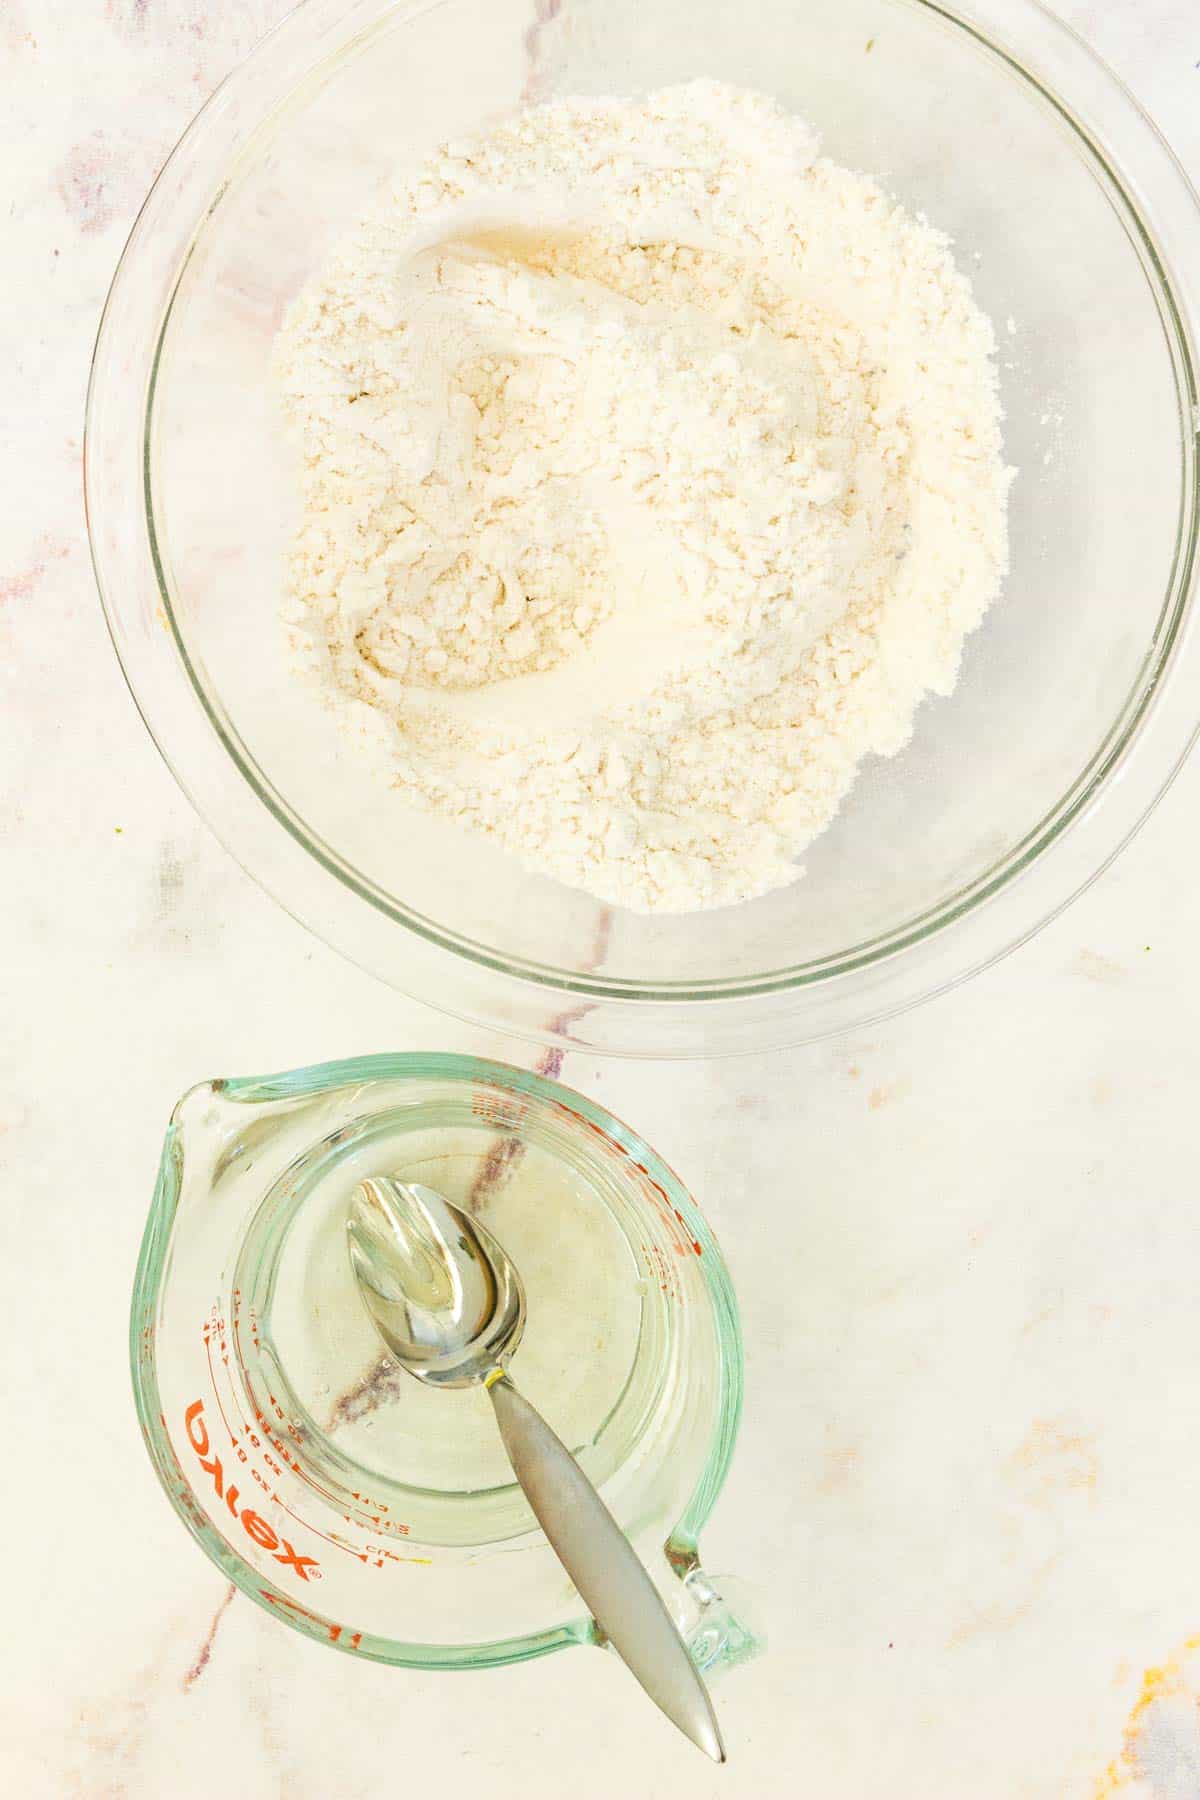 The flour and dry ingredients in a mixing bowl next to a measuring cup of warm water and a spoon.